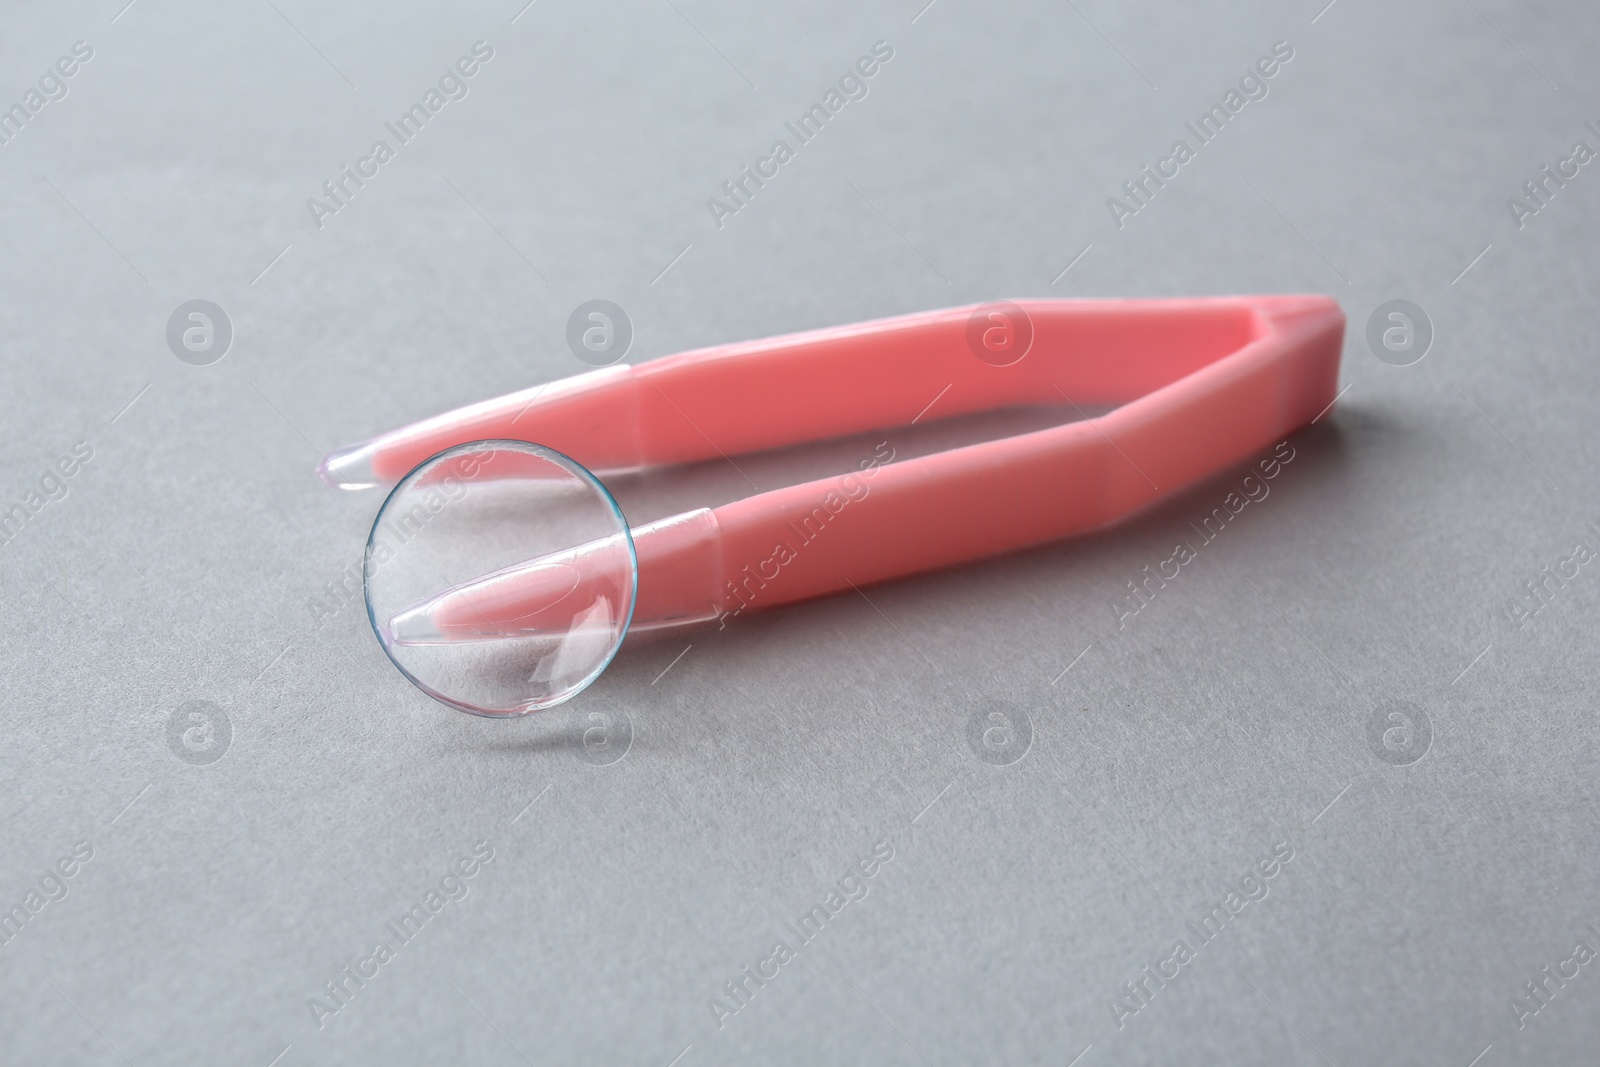 Photo of Tweezers with contact lens on light background